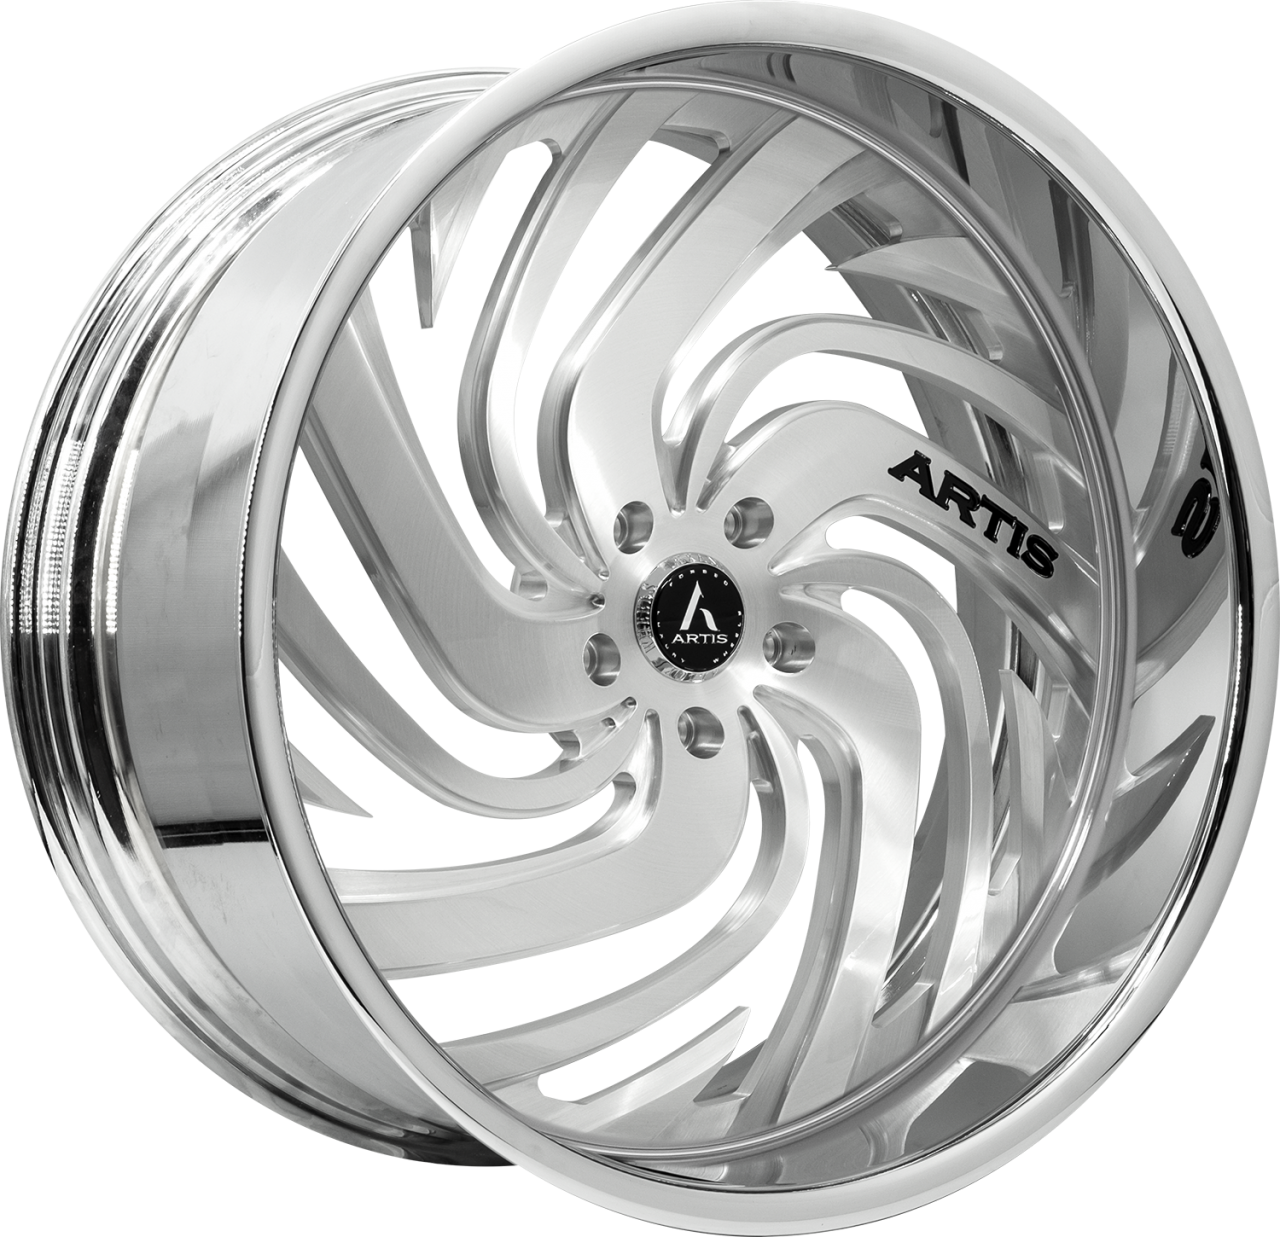 Artis Forged Fillmore-M wheel with Brushed finish